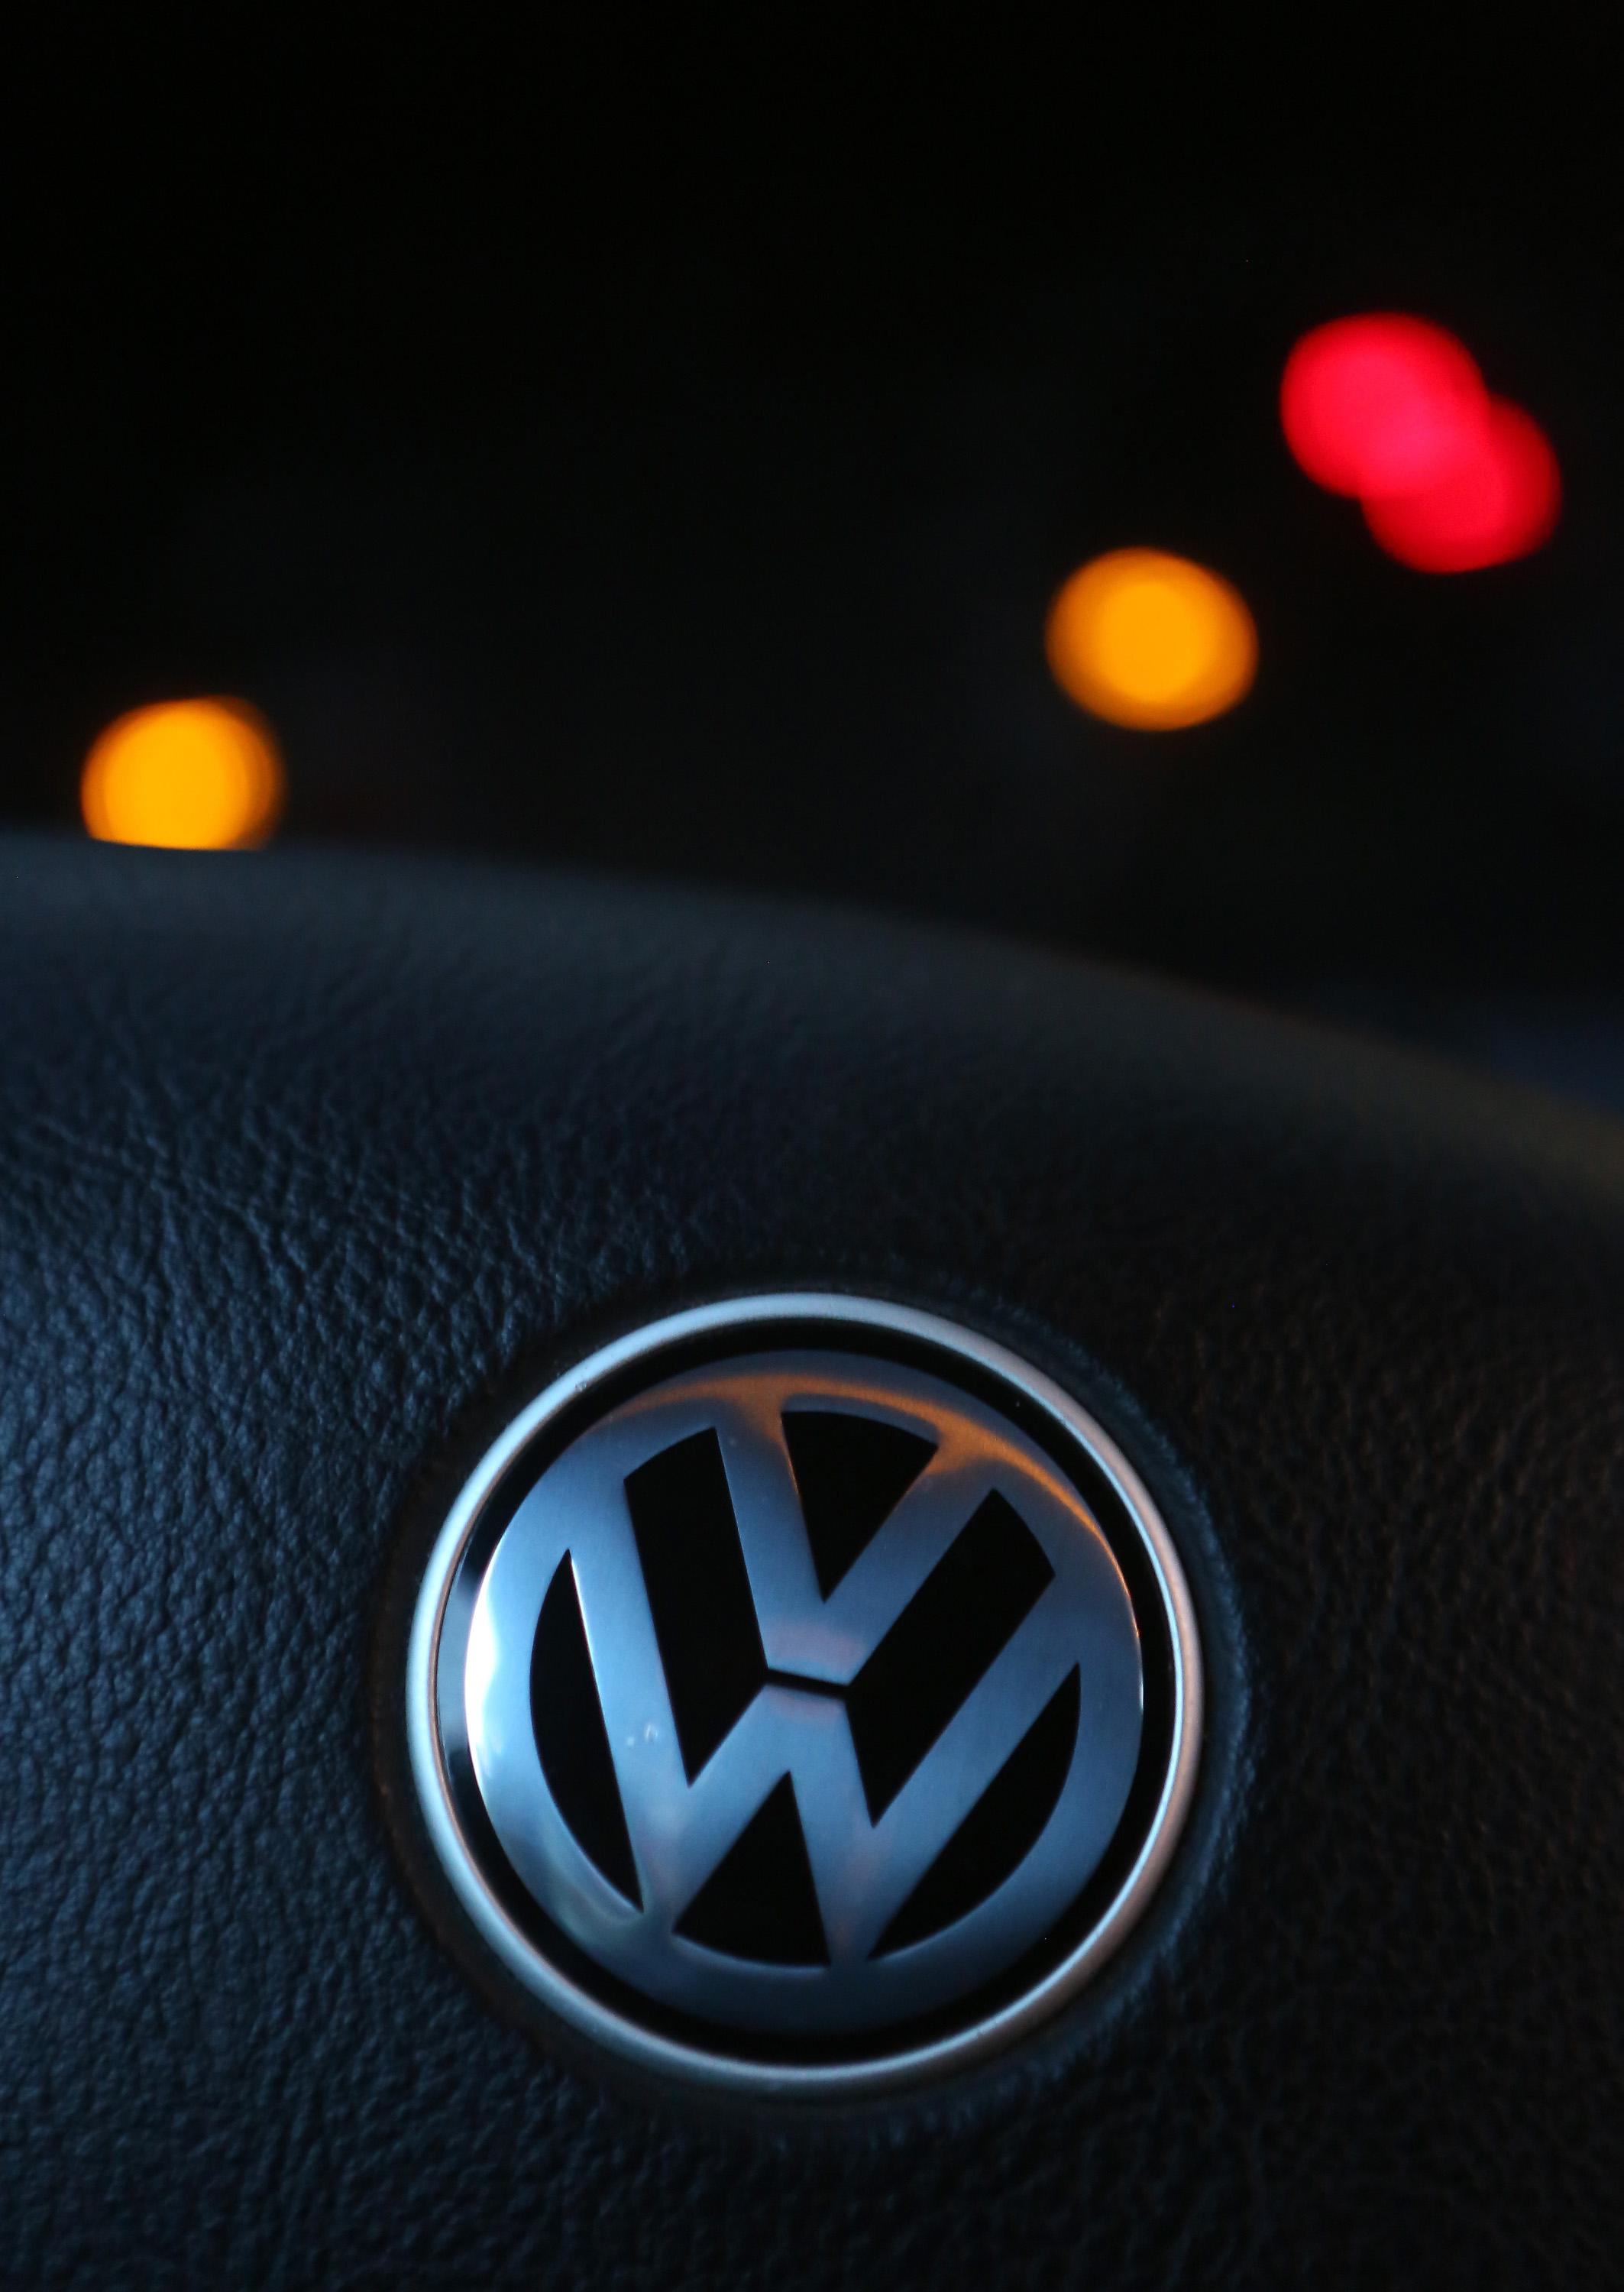 A Volkswagen (VW) logo is seen on the steering wheel of one of the Volkswagen cars in Berlin on Sept. 18, 2015. (Adam Berry—Getty Images)